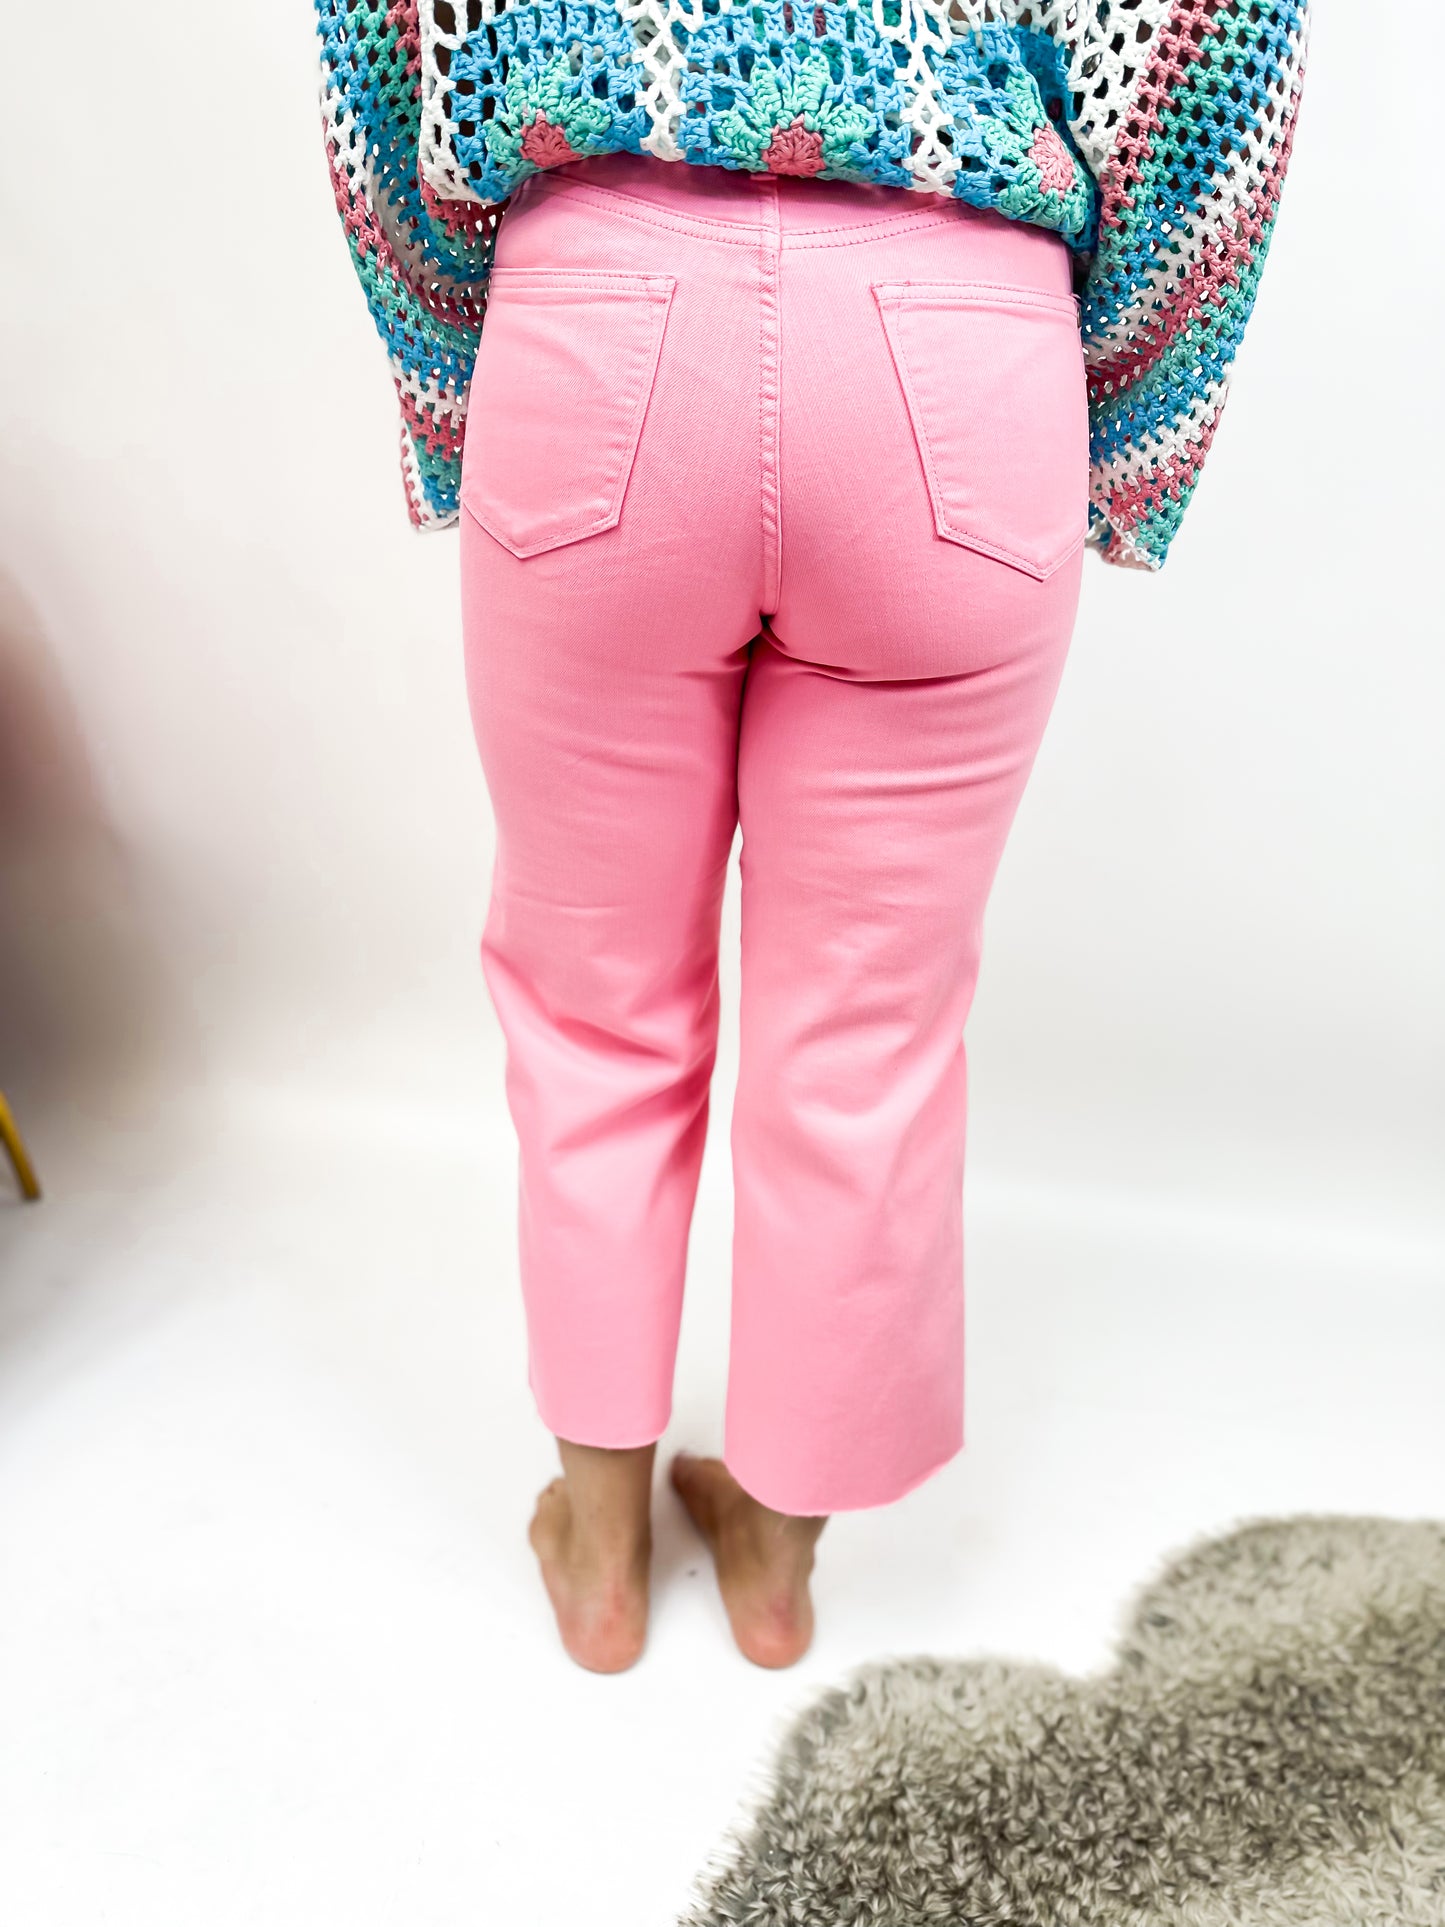 Judy Blue A Touch of Pink Jeans